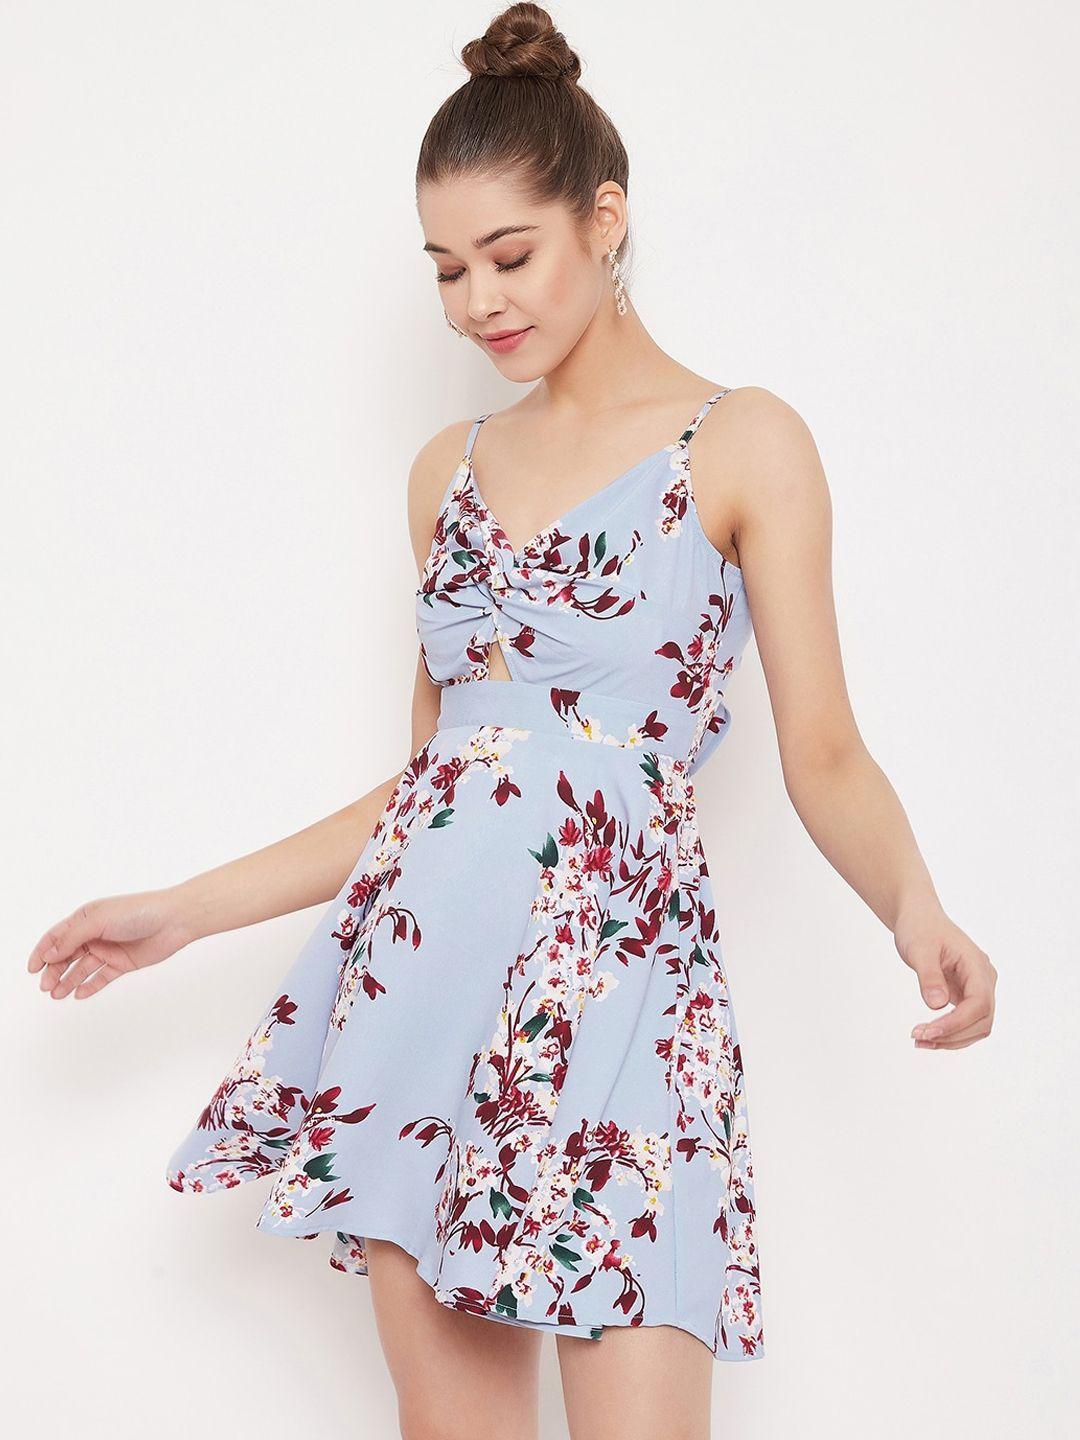 berrylush women blue floral printed fit and flare dress